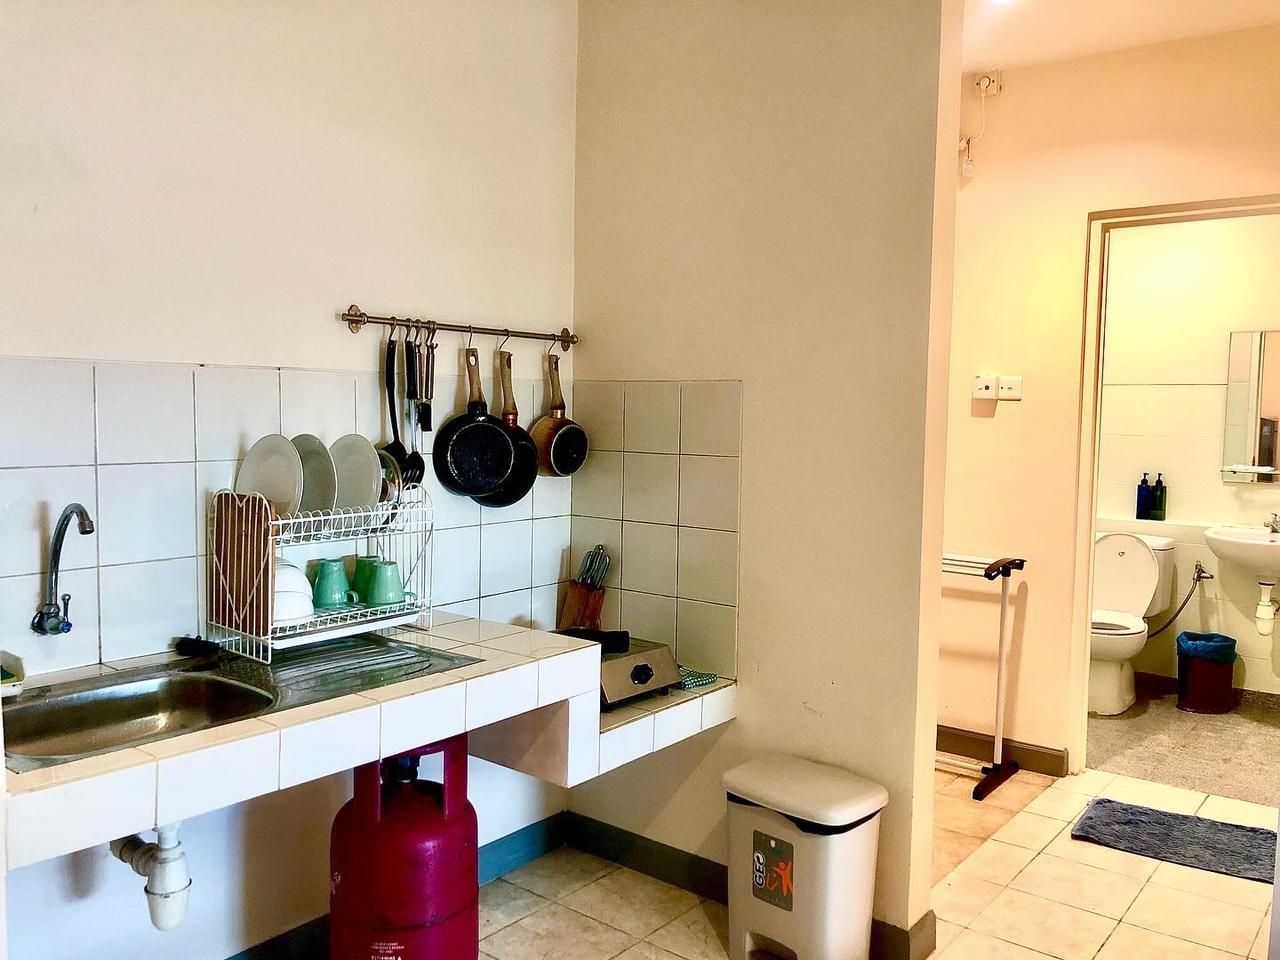 The kitchen includes appliances such as a refrigerator, stove, frying pan, boiling pan, and sink. There is also a dining area with a table and chairs, then simple cutleries.